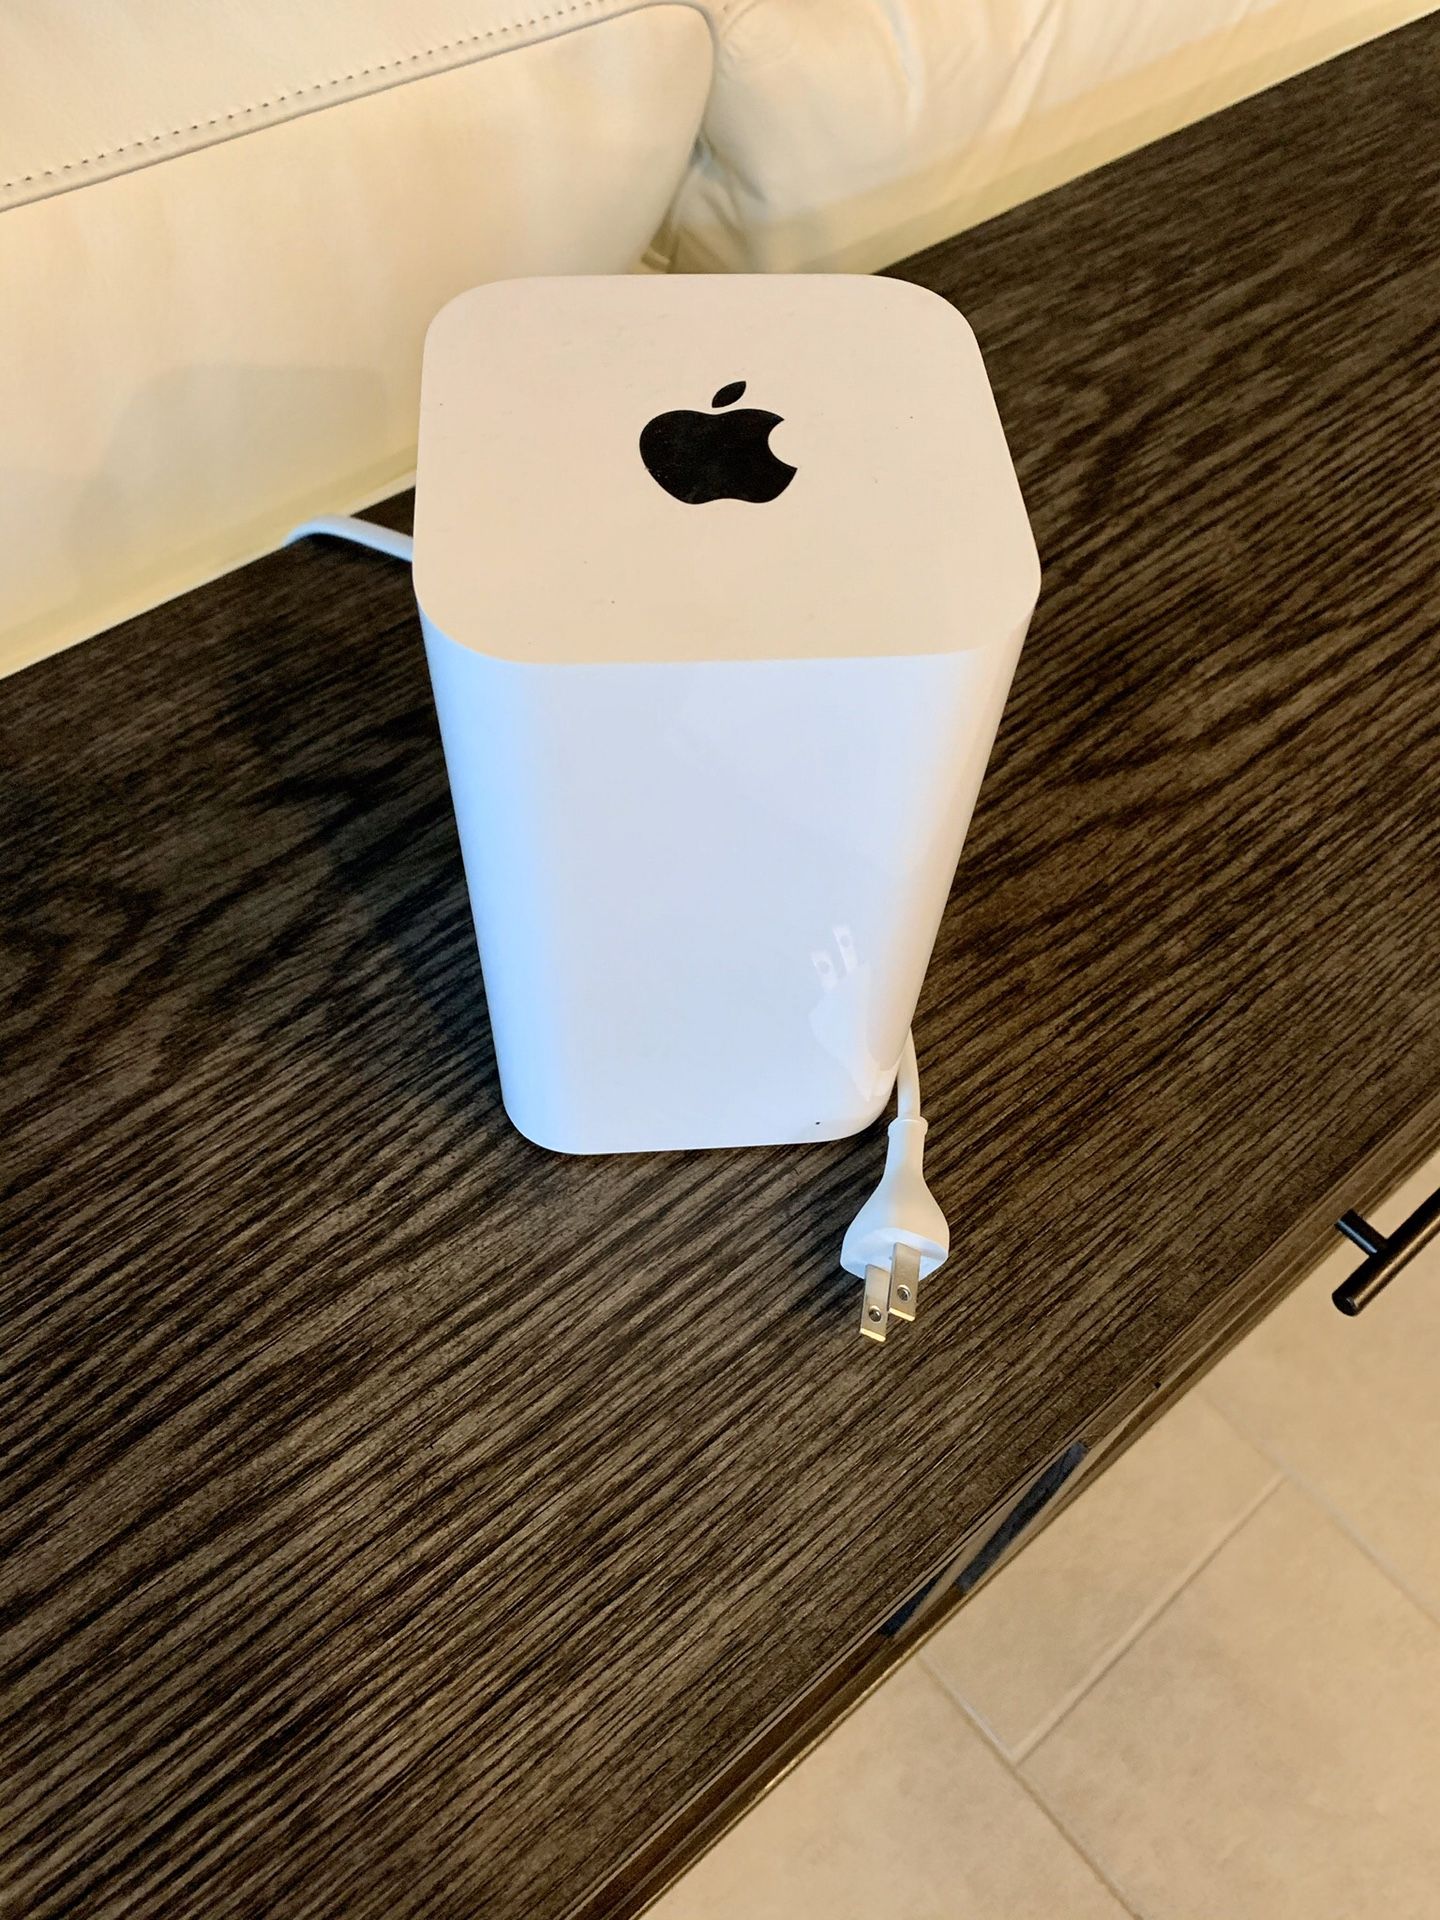 Apple AirPort Extreme internet router